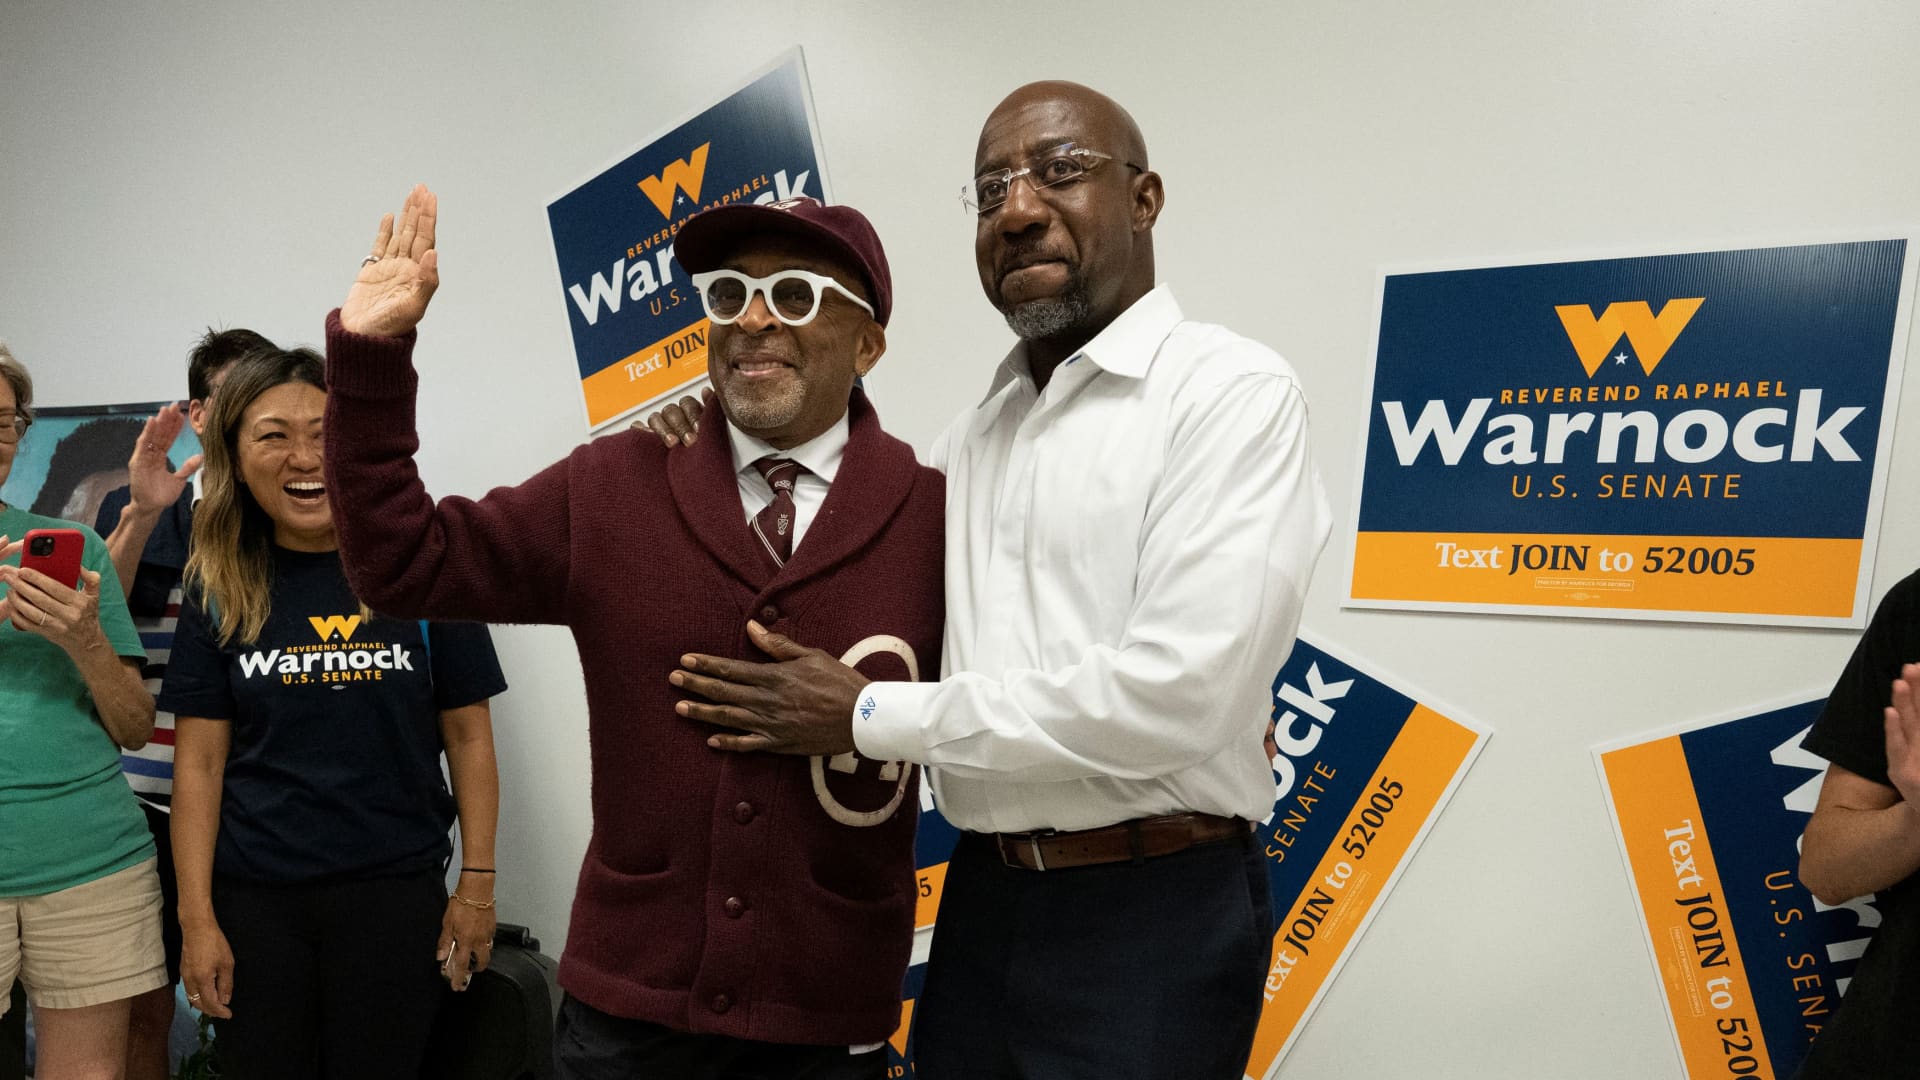 Rev. Raphael Warnock, Democratic Senator for Georgia is joined by director Spike Lee at a midterm election campaign event in Savannah, Georgia, U.S., November 6, 2022.